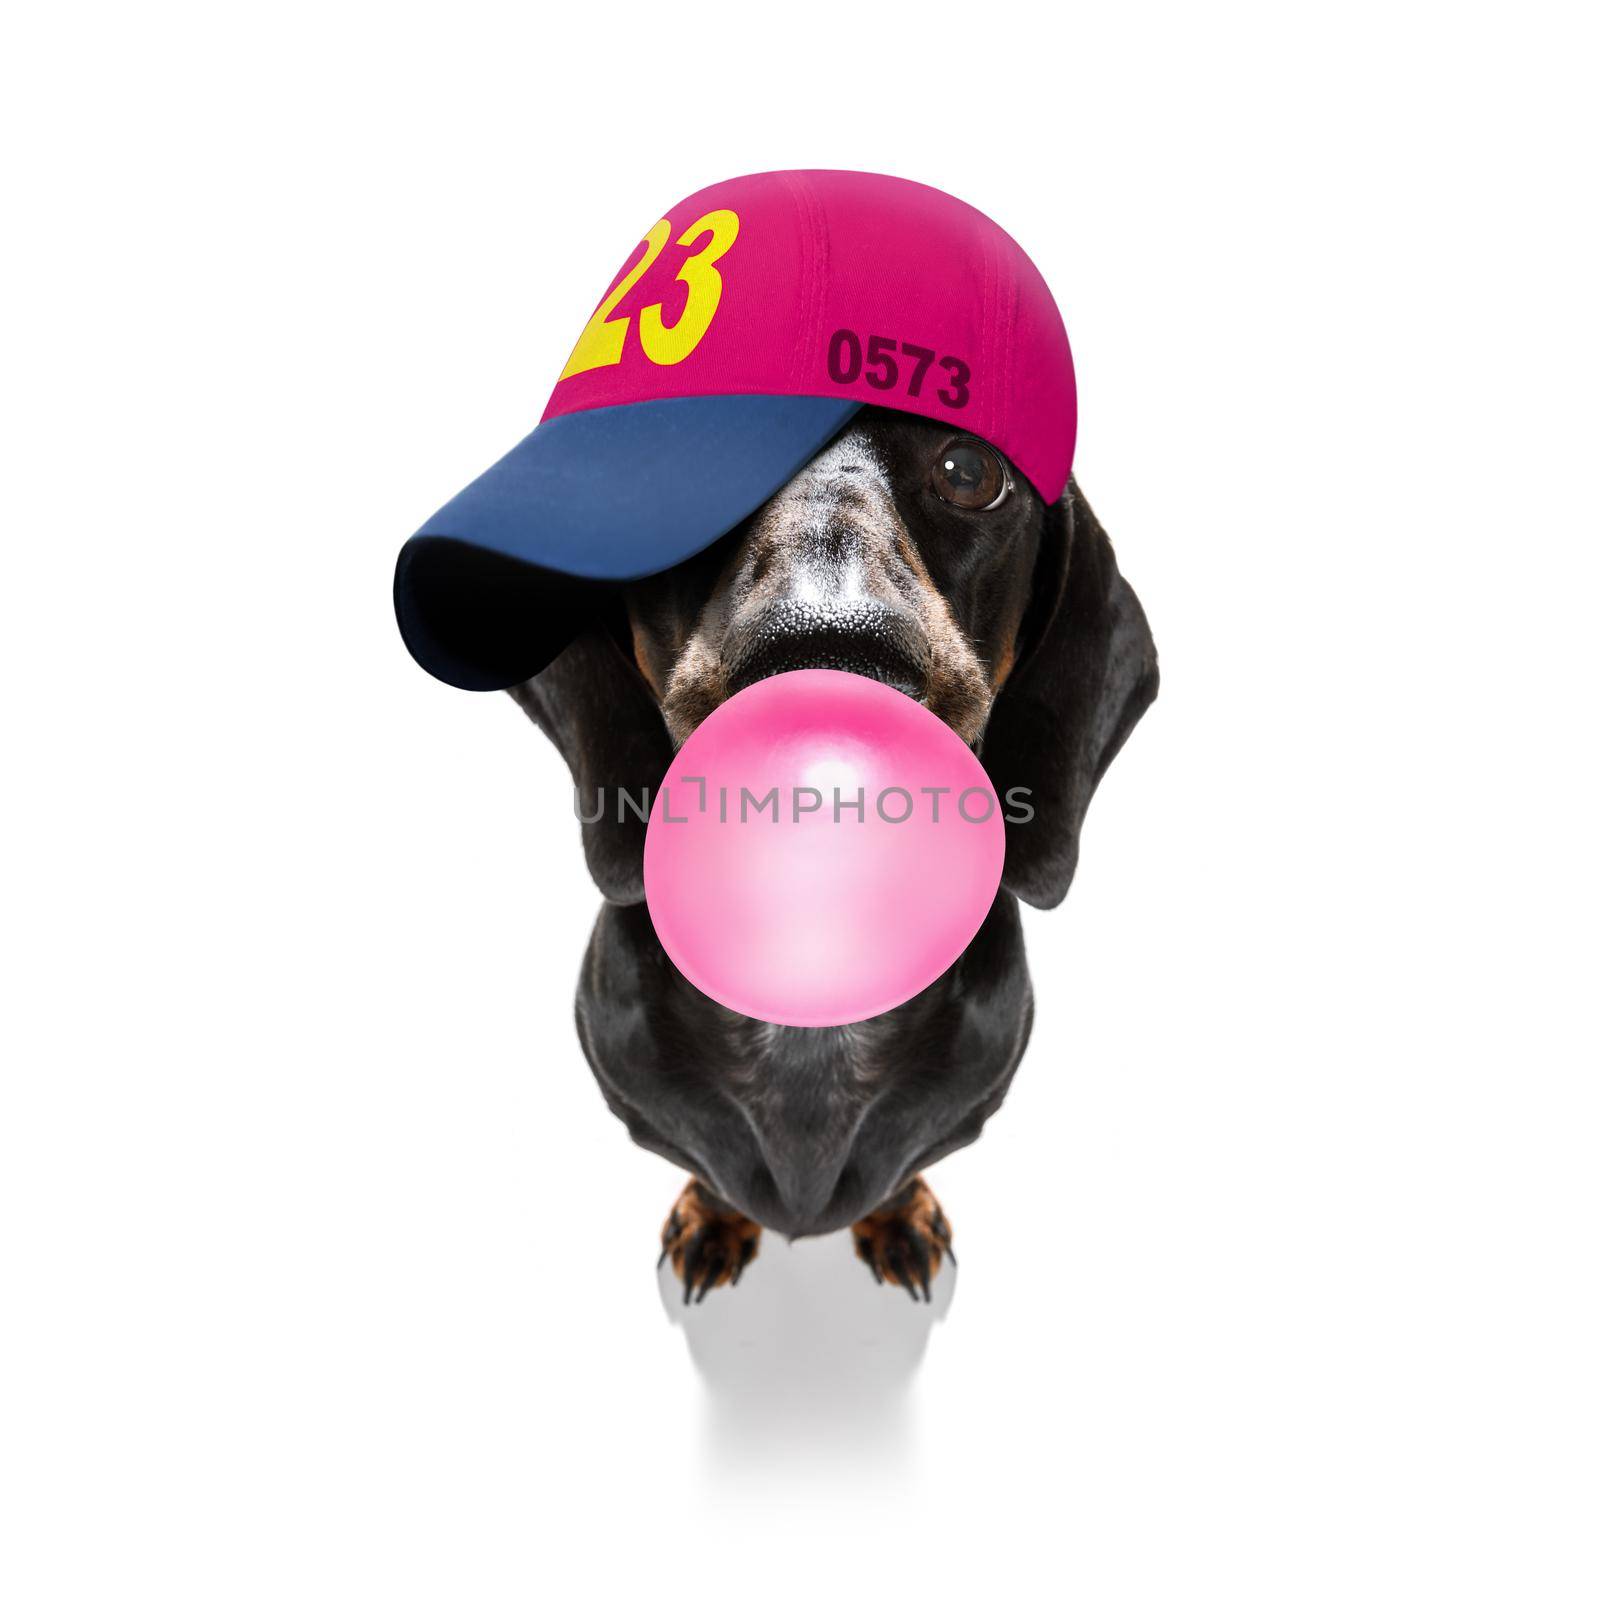 cool casual look dachshund  dog wearing a baseball cap or hat , sporty and fit , chewing bubble gum